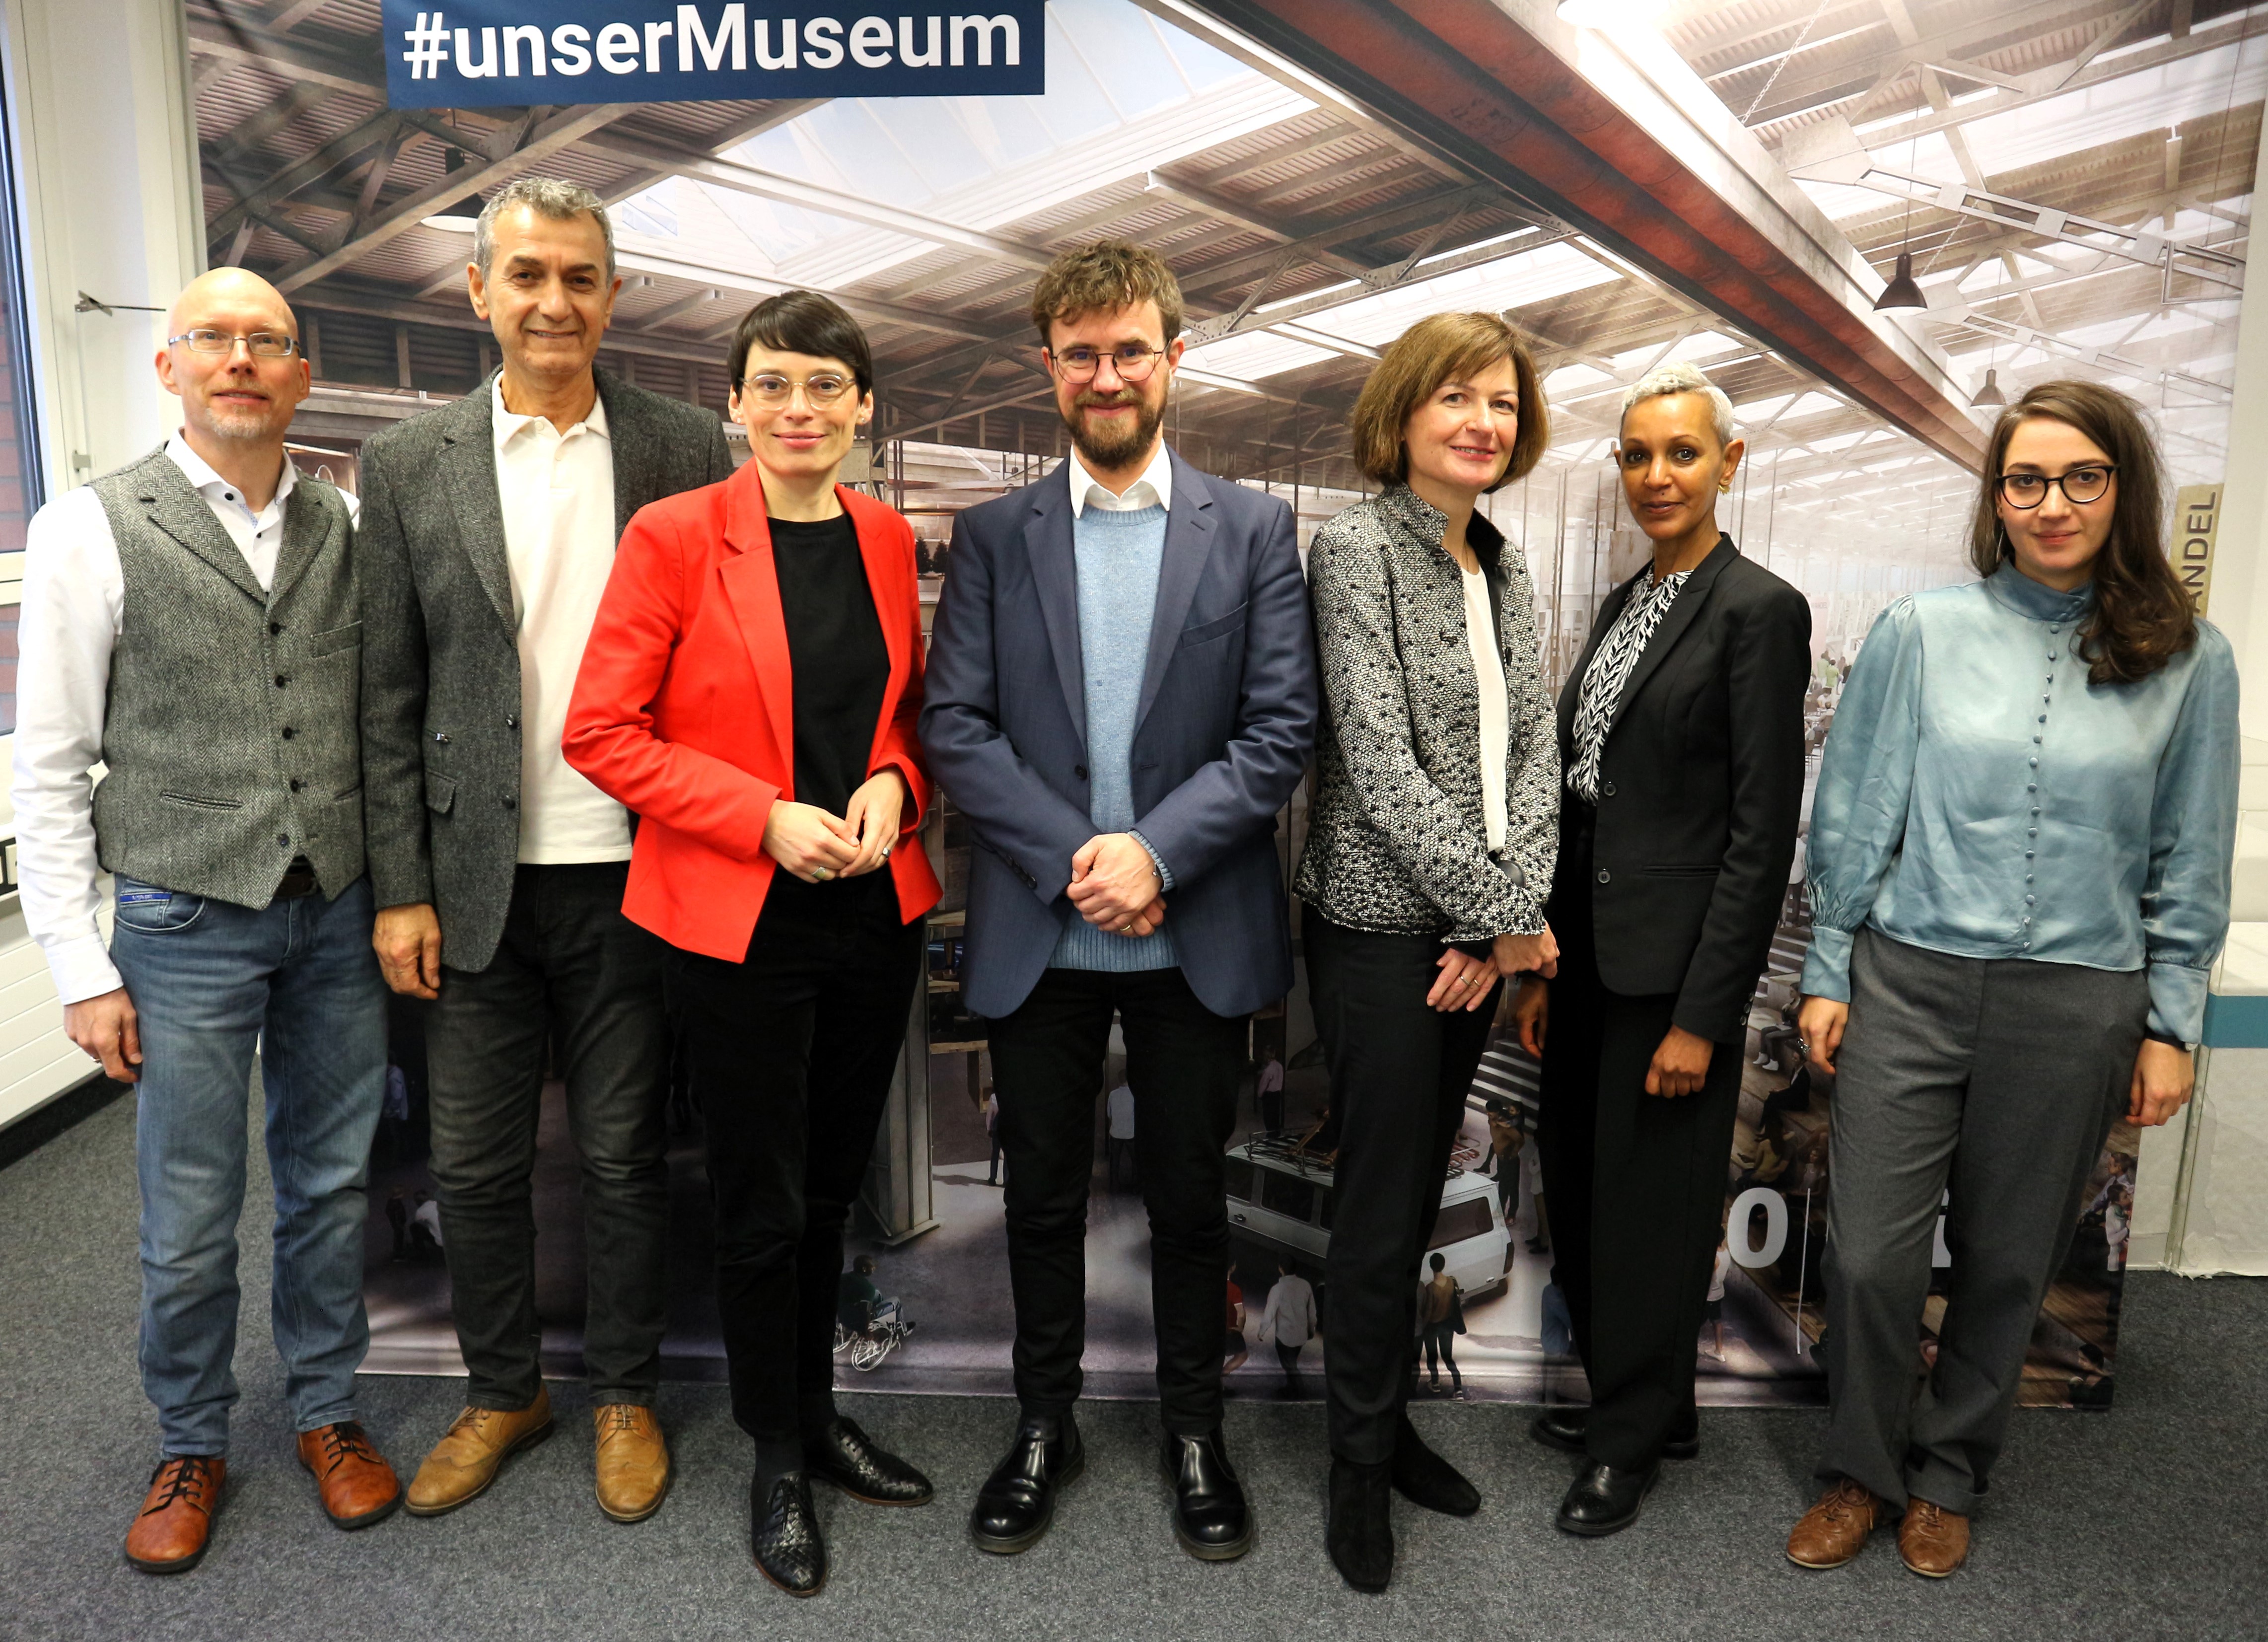 From left to right: Jens Grimmelijkhuizen (DOMiD Board), Tevfik Aslan-Cimikoglu (DOMiD Board), Josefine Paul (Minister for Children, Youth, Family, Equality, Refugees and Integration of the State of North Rhine-Westphalia), Dr. Robert Fuchs (DOMiD Management), Dr. Iva Krtalić (DOMiD Board), Yordanos Asghedom (DOMiD Project Management), Lina Falivena (DOMiD Curation). Photo: DOMiD archive, Cologne